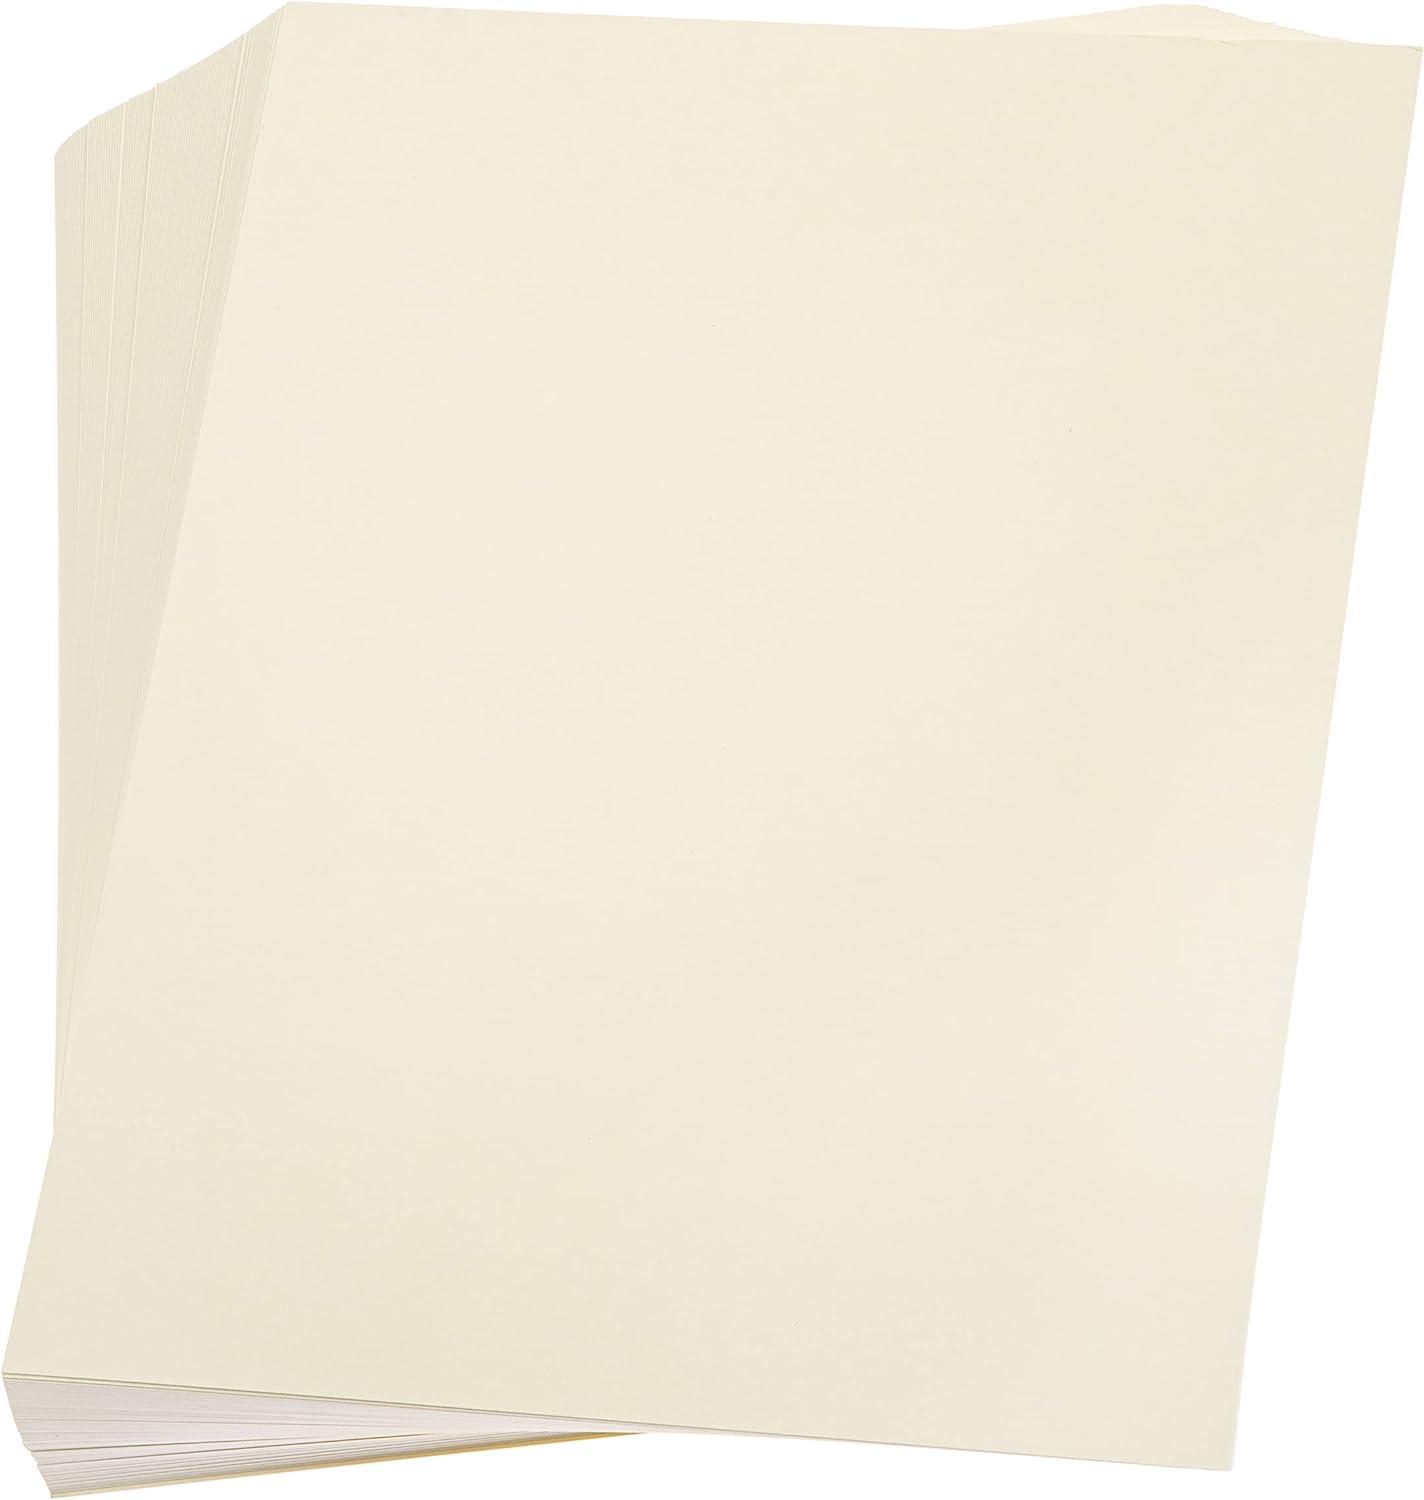  25 Sheets, White Cardstock Paper Heavyweight - 110 lb. Cover,  12 x 12 : Arts, Crafts & Sewing